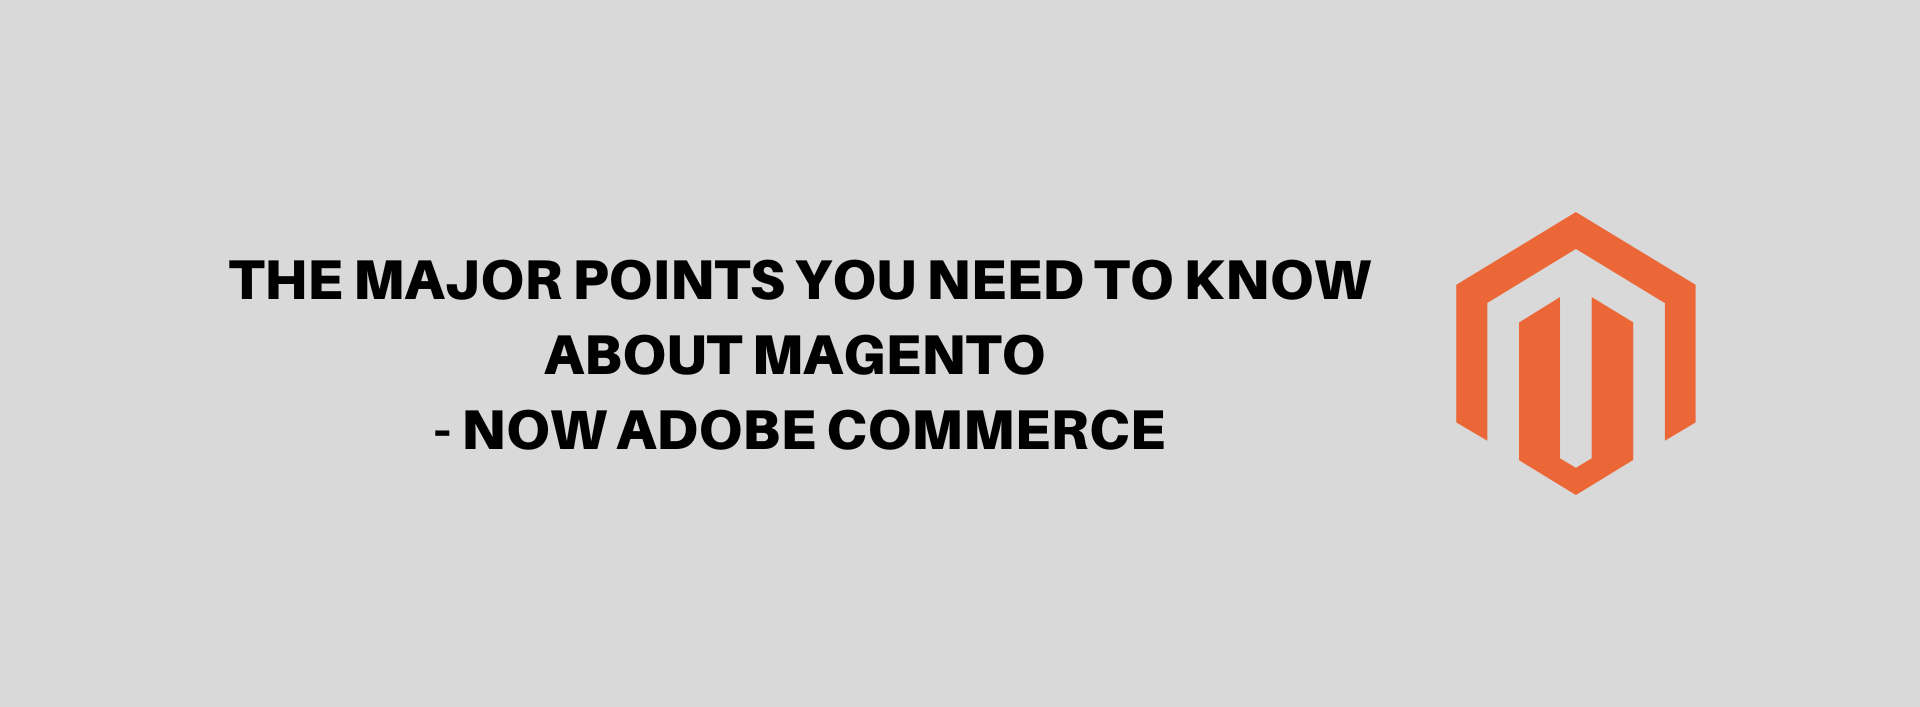 The major points you need to know about Magento